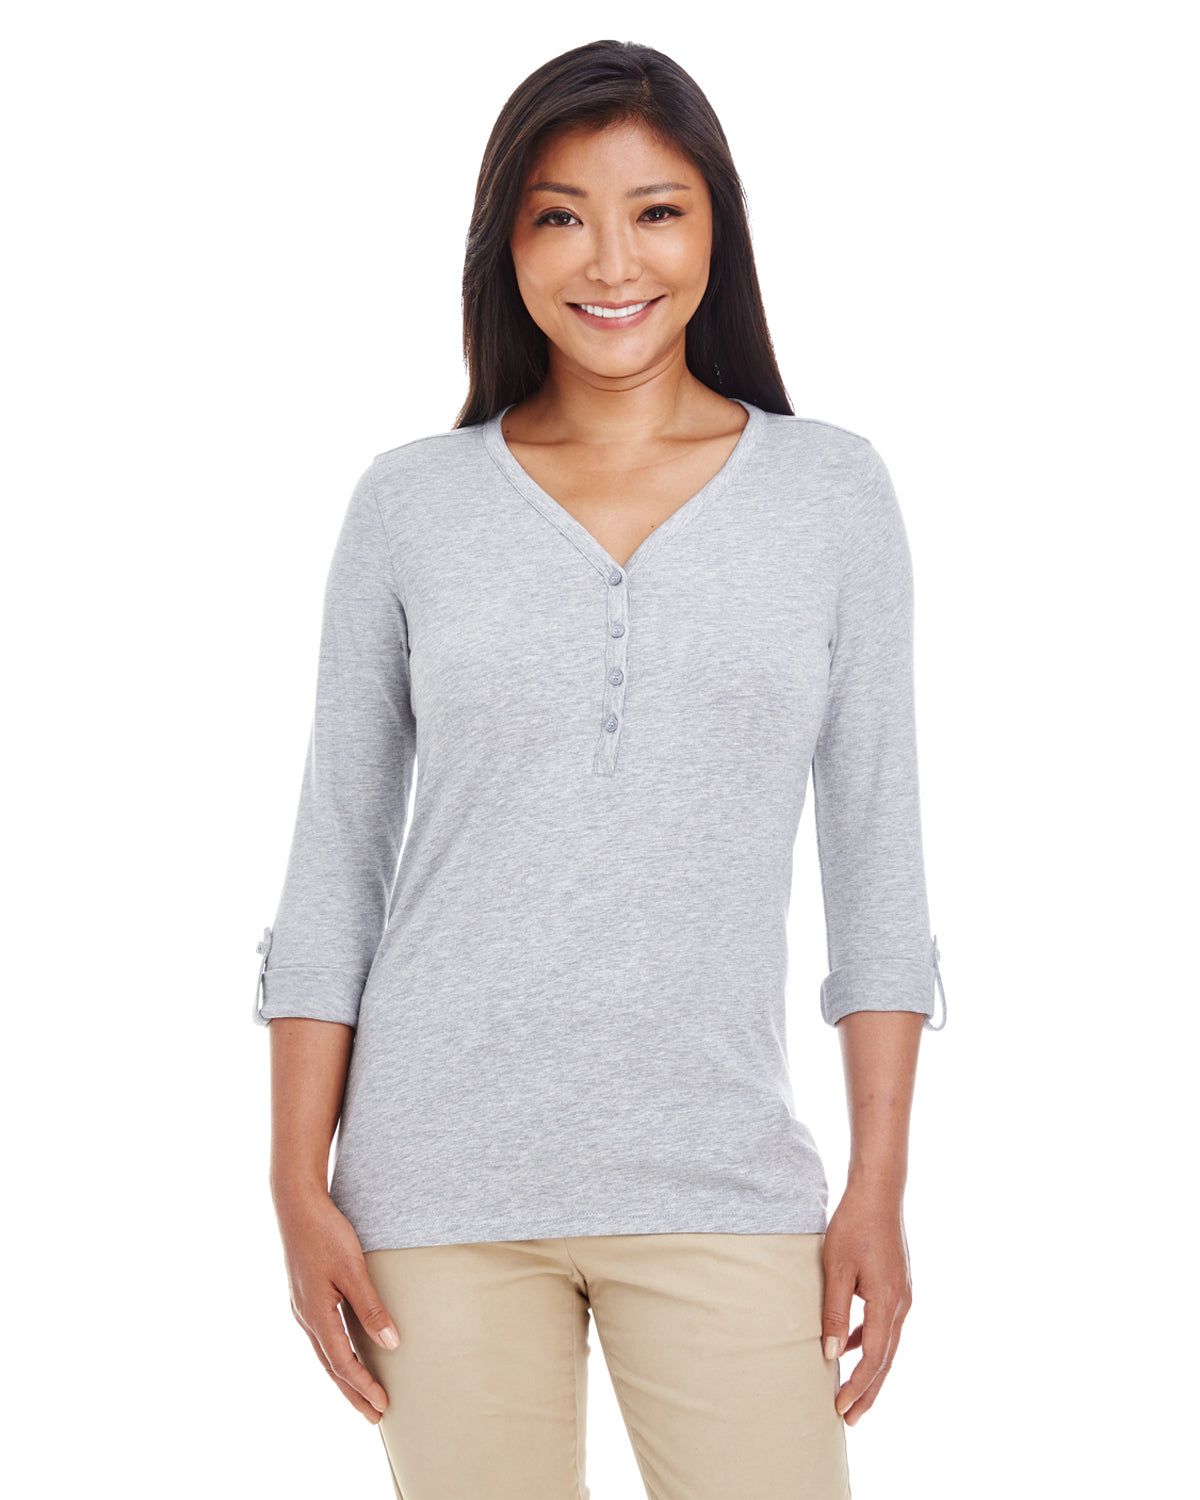 Ladies' Perfect Fit Convertible Sleeve Knit Top - shoppe list